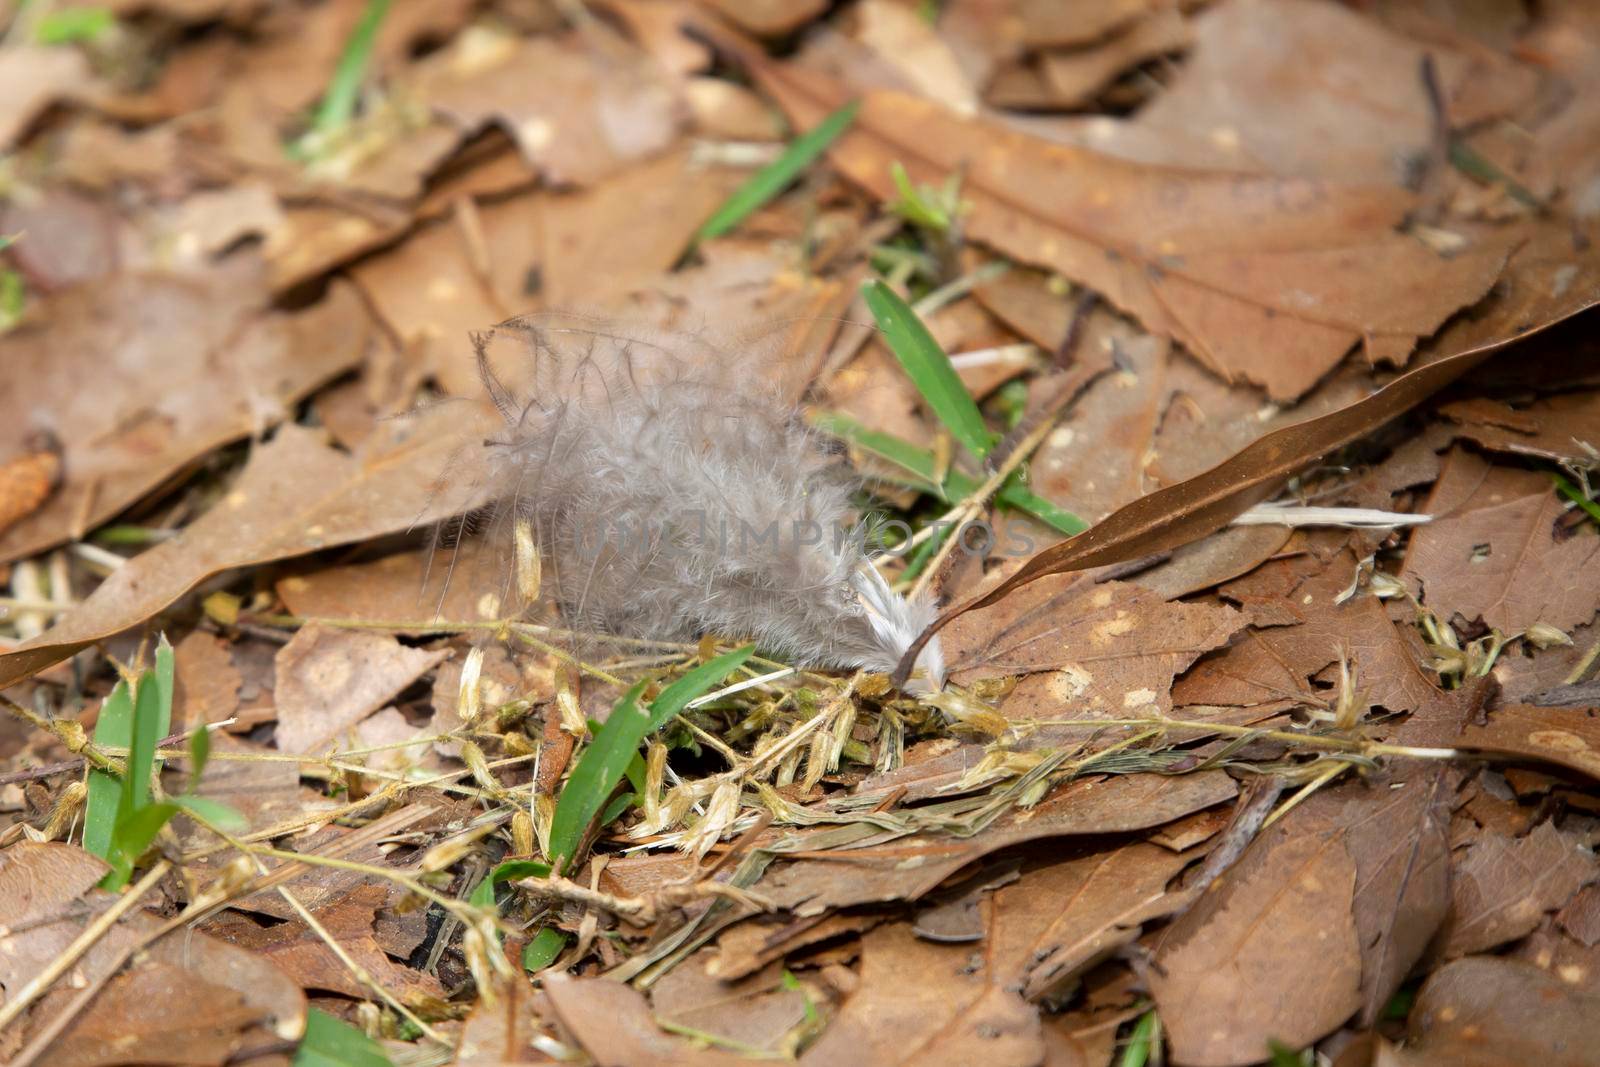 Clump of fluffy grey feathers on the leaf-laden ground